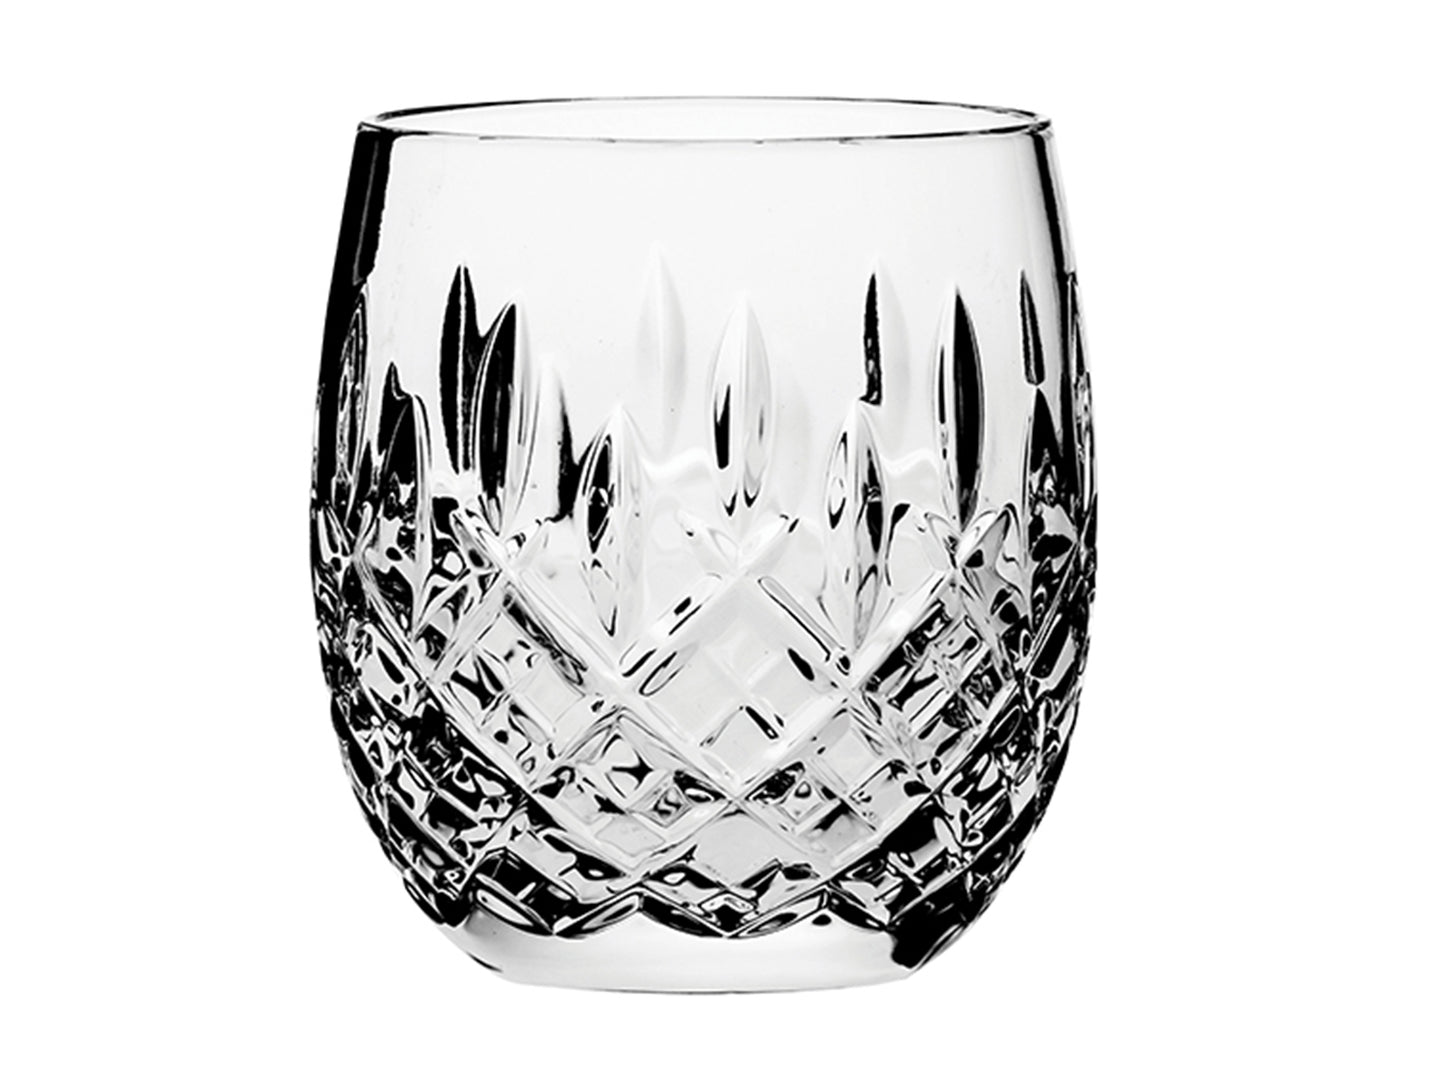 Single Royal Scot Crystal Barrel Tumbler, which is hand cut with a simple diamond cut, topped with clean dashes above